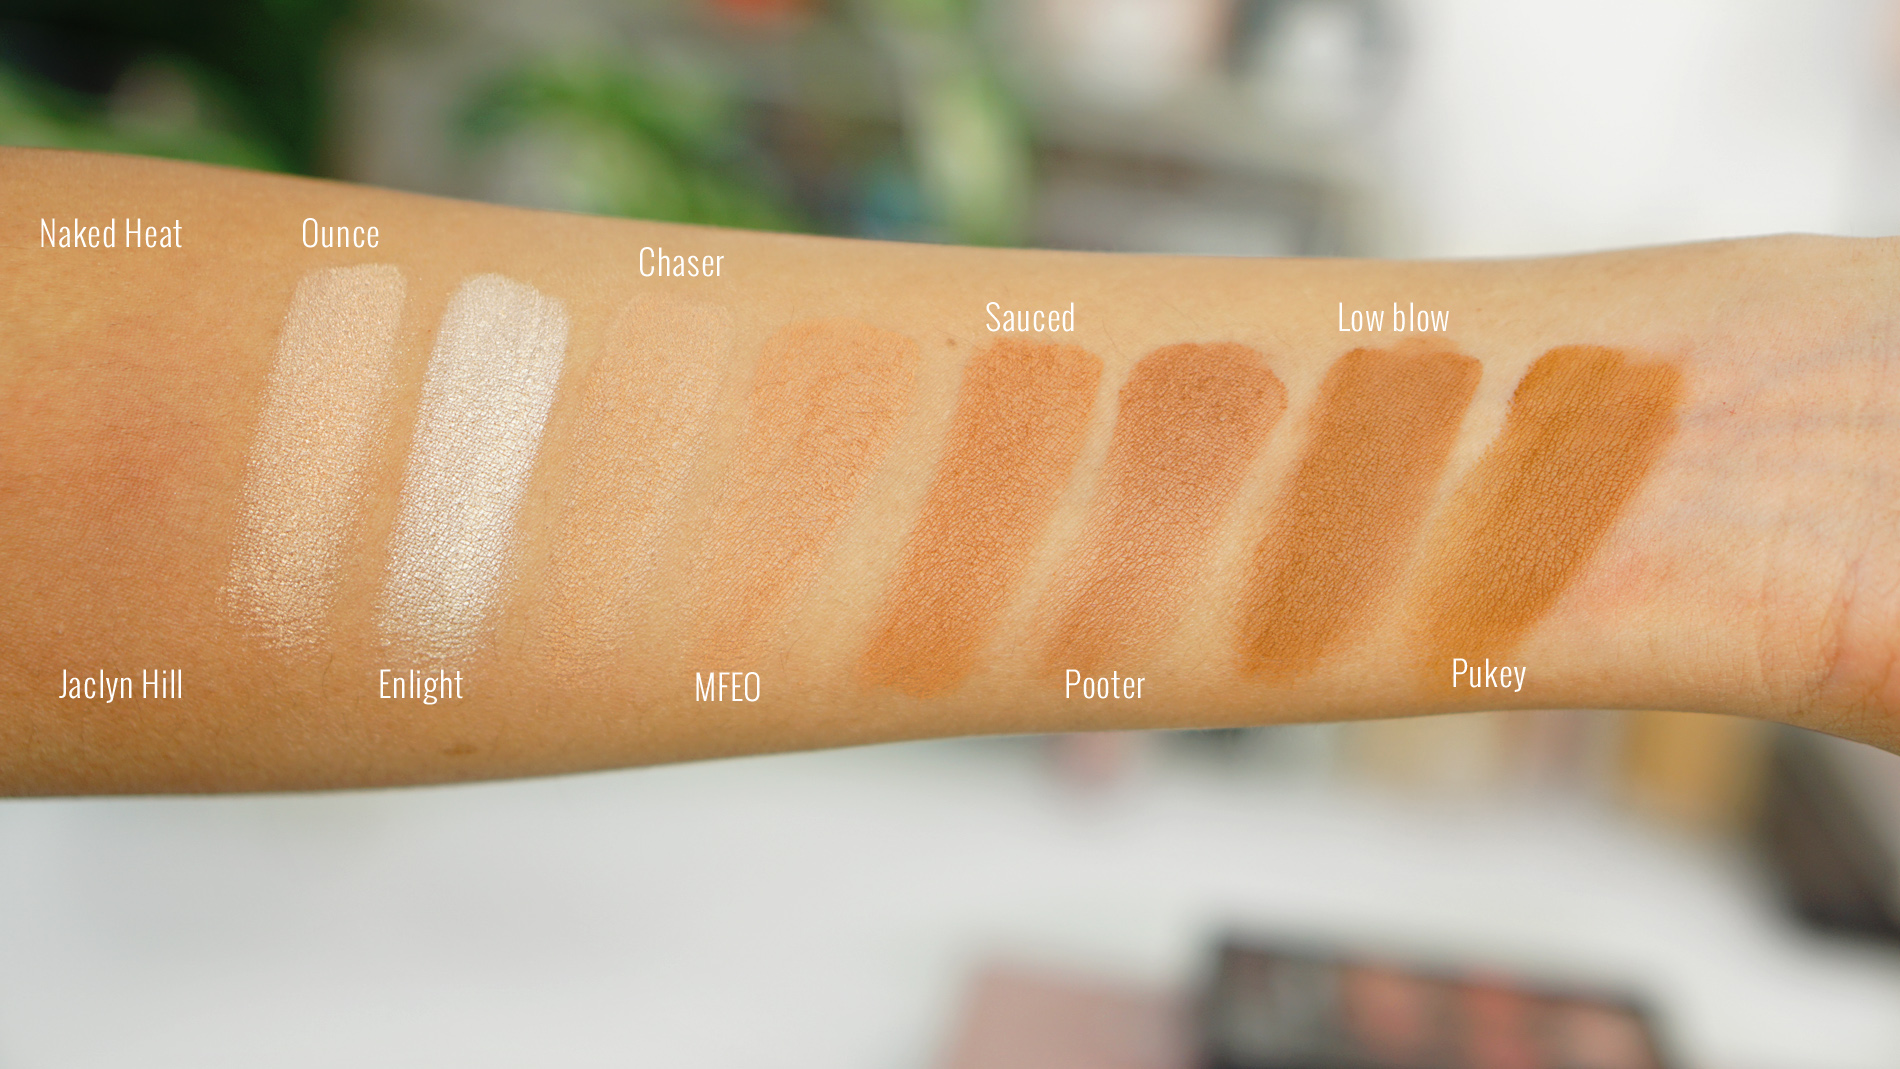 Urban decay naked heat vs morphe jaclyn hill swatches1